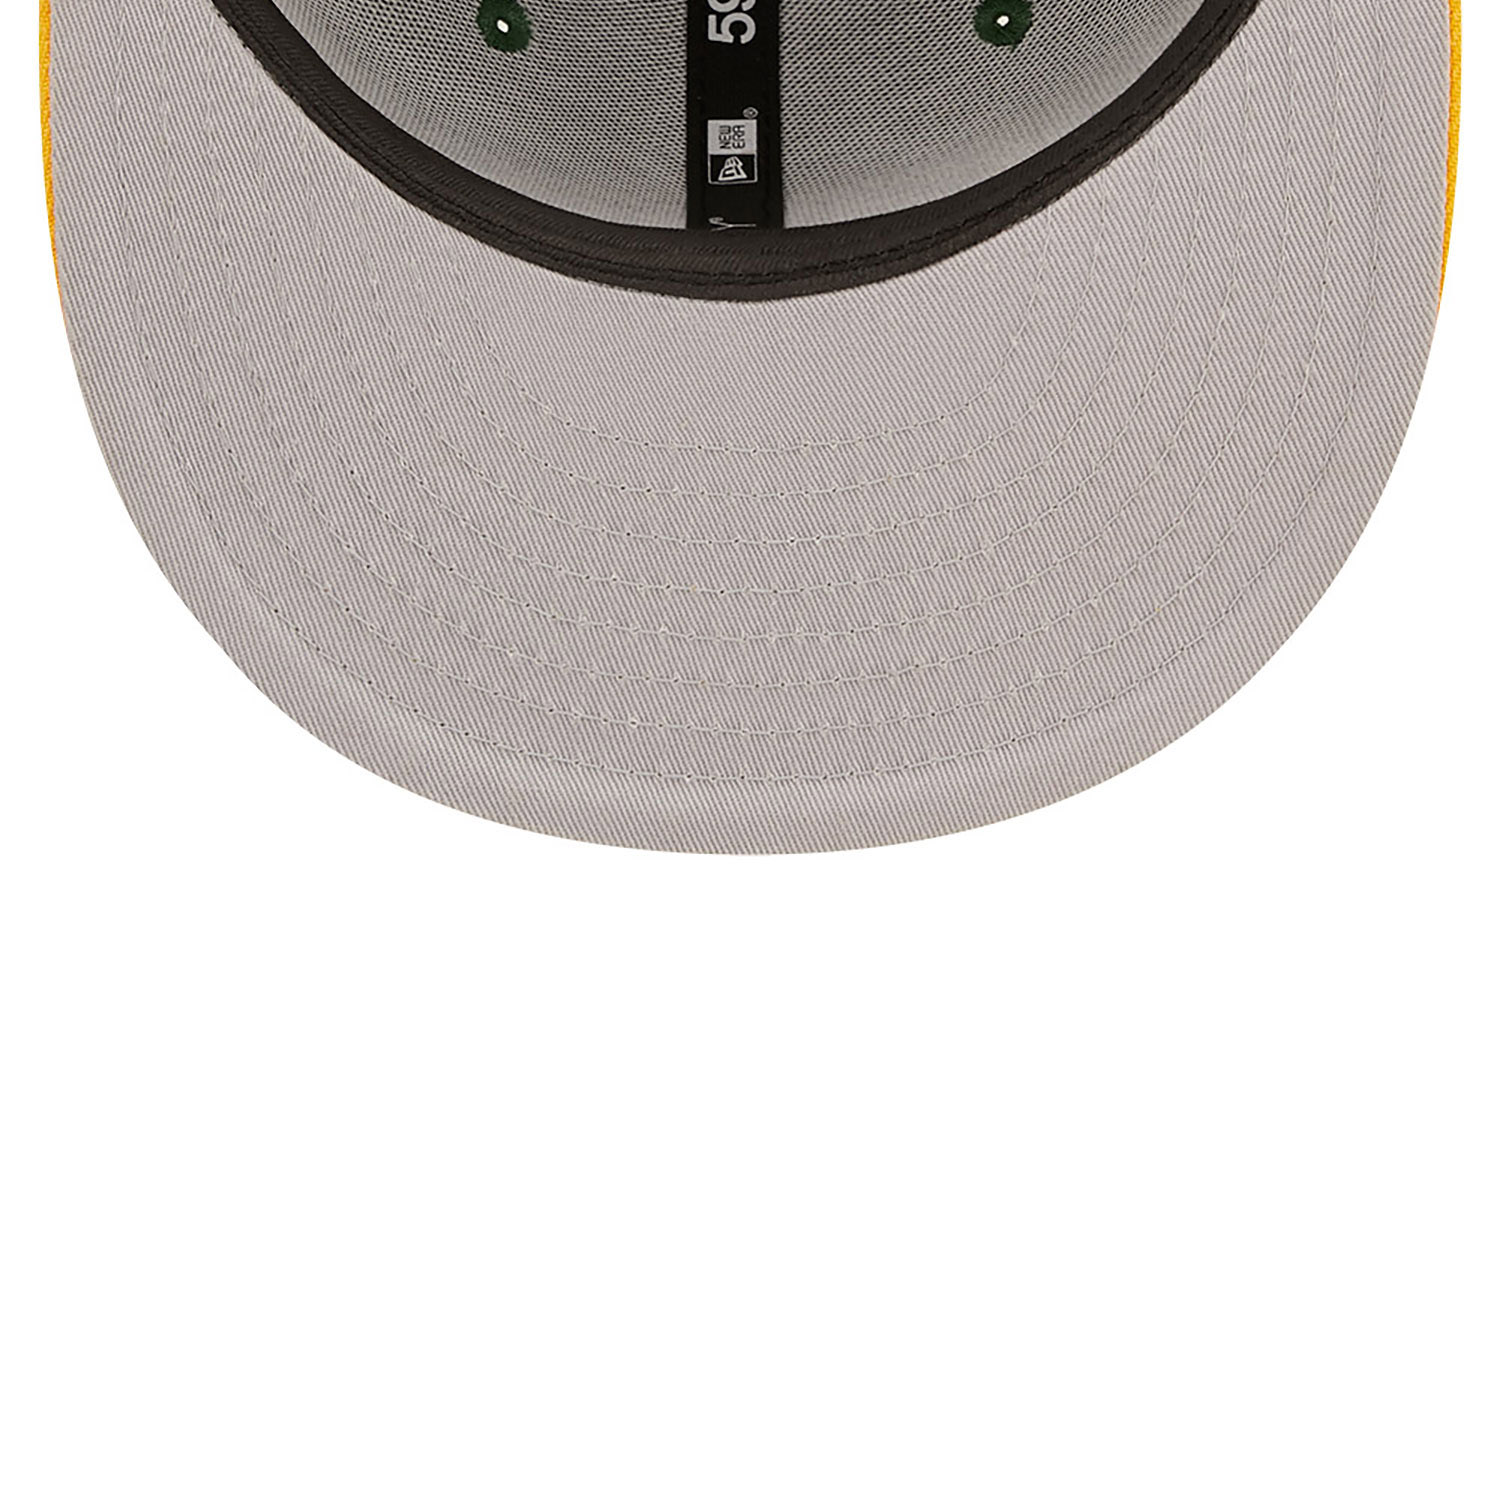 Green Bay Packers NE Letterman Dark Green 59FIFTY Fitted Cap